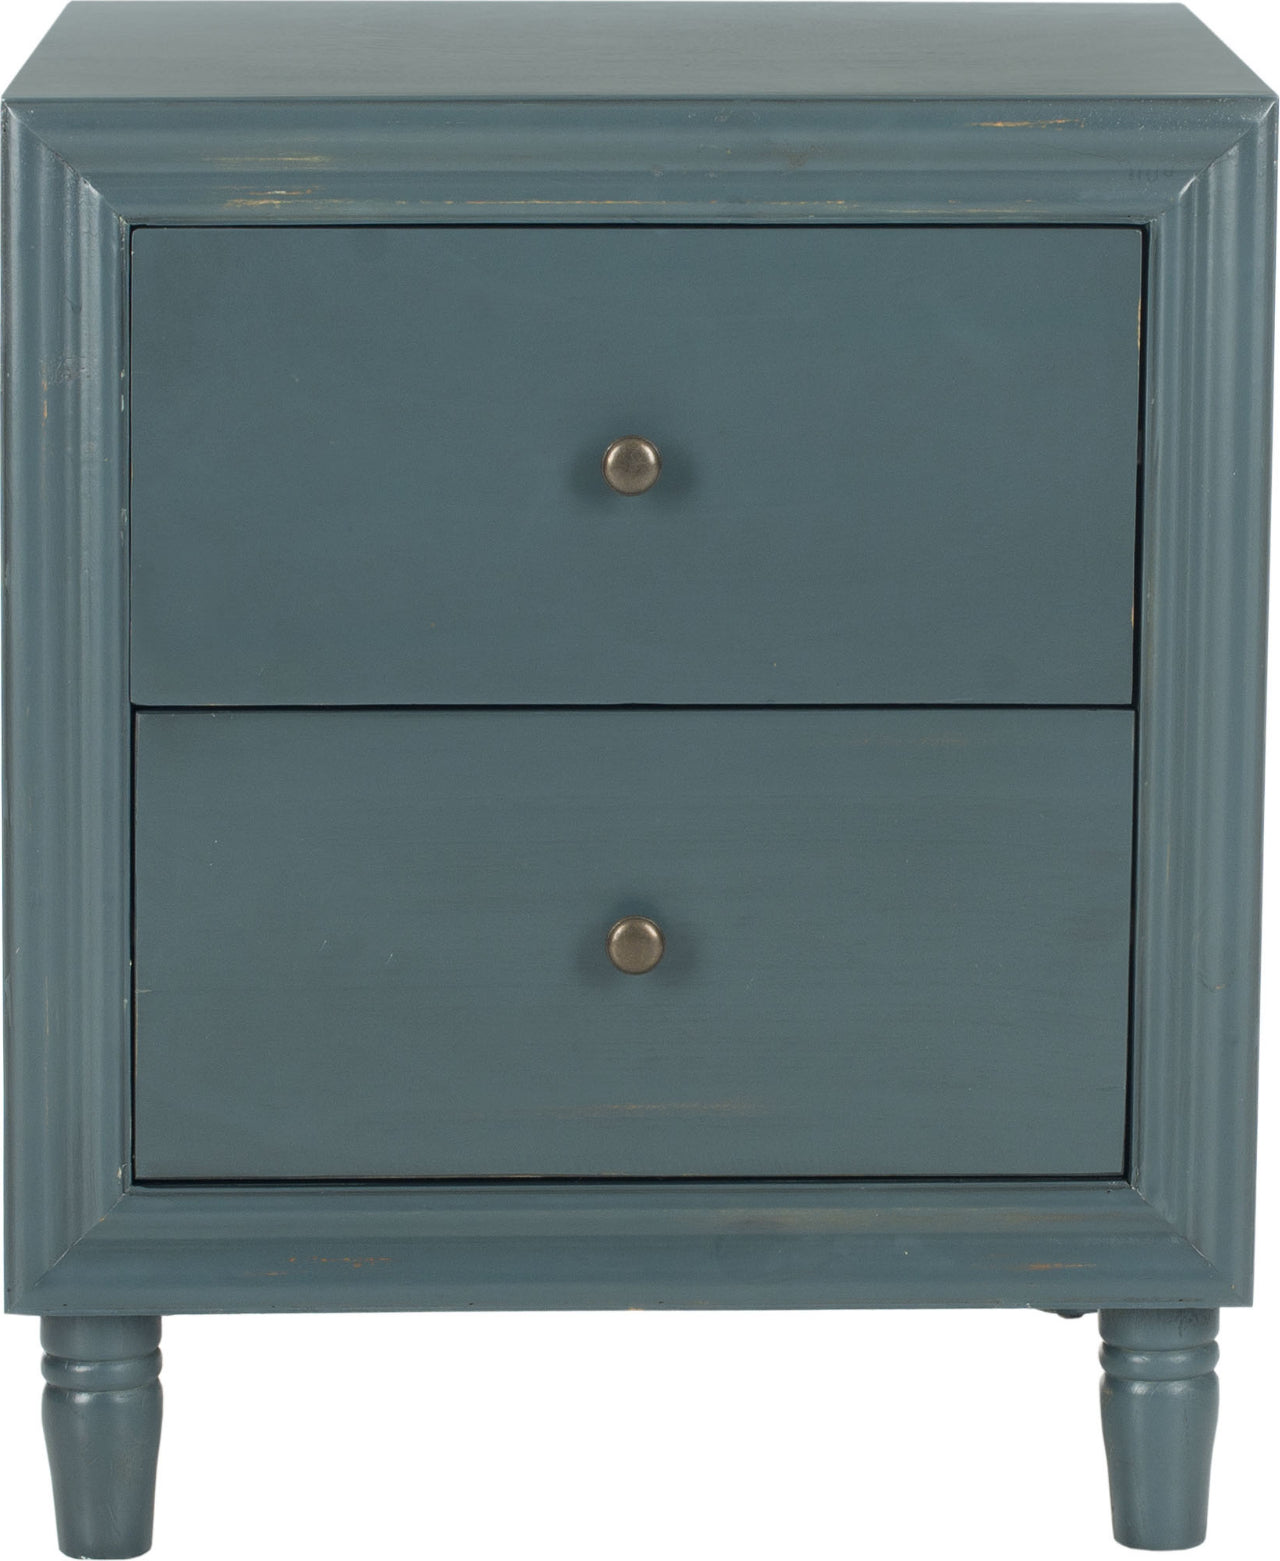 Safavieh Blaise Accent Stand With Storage Drawers Steel Teal Furniture main image